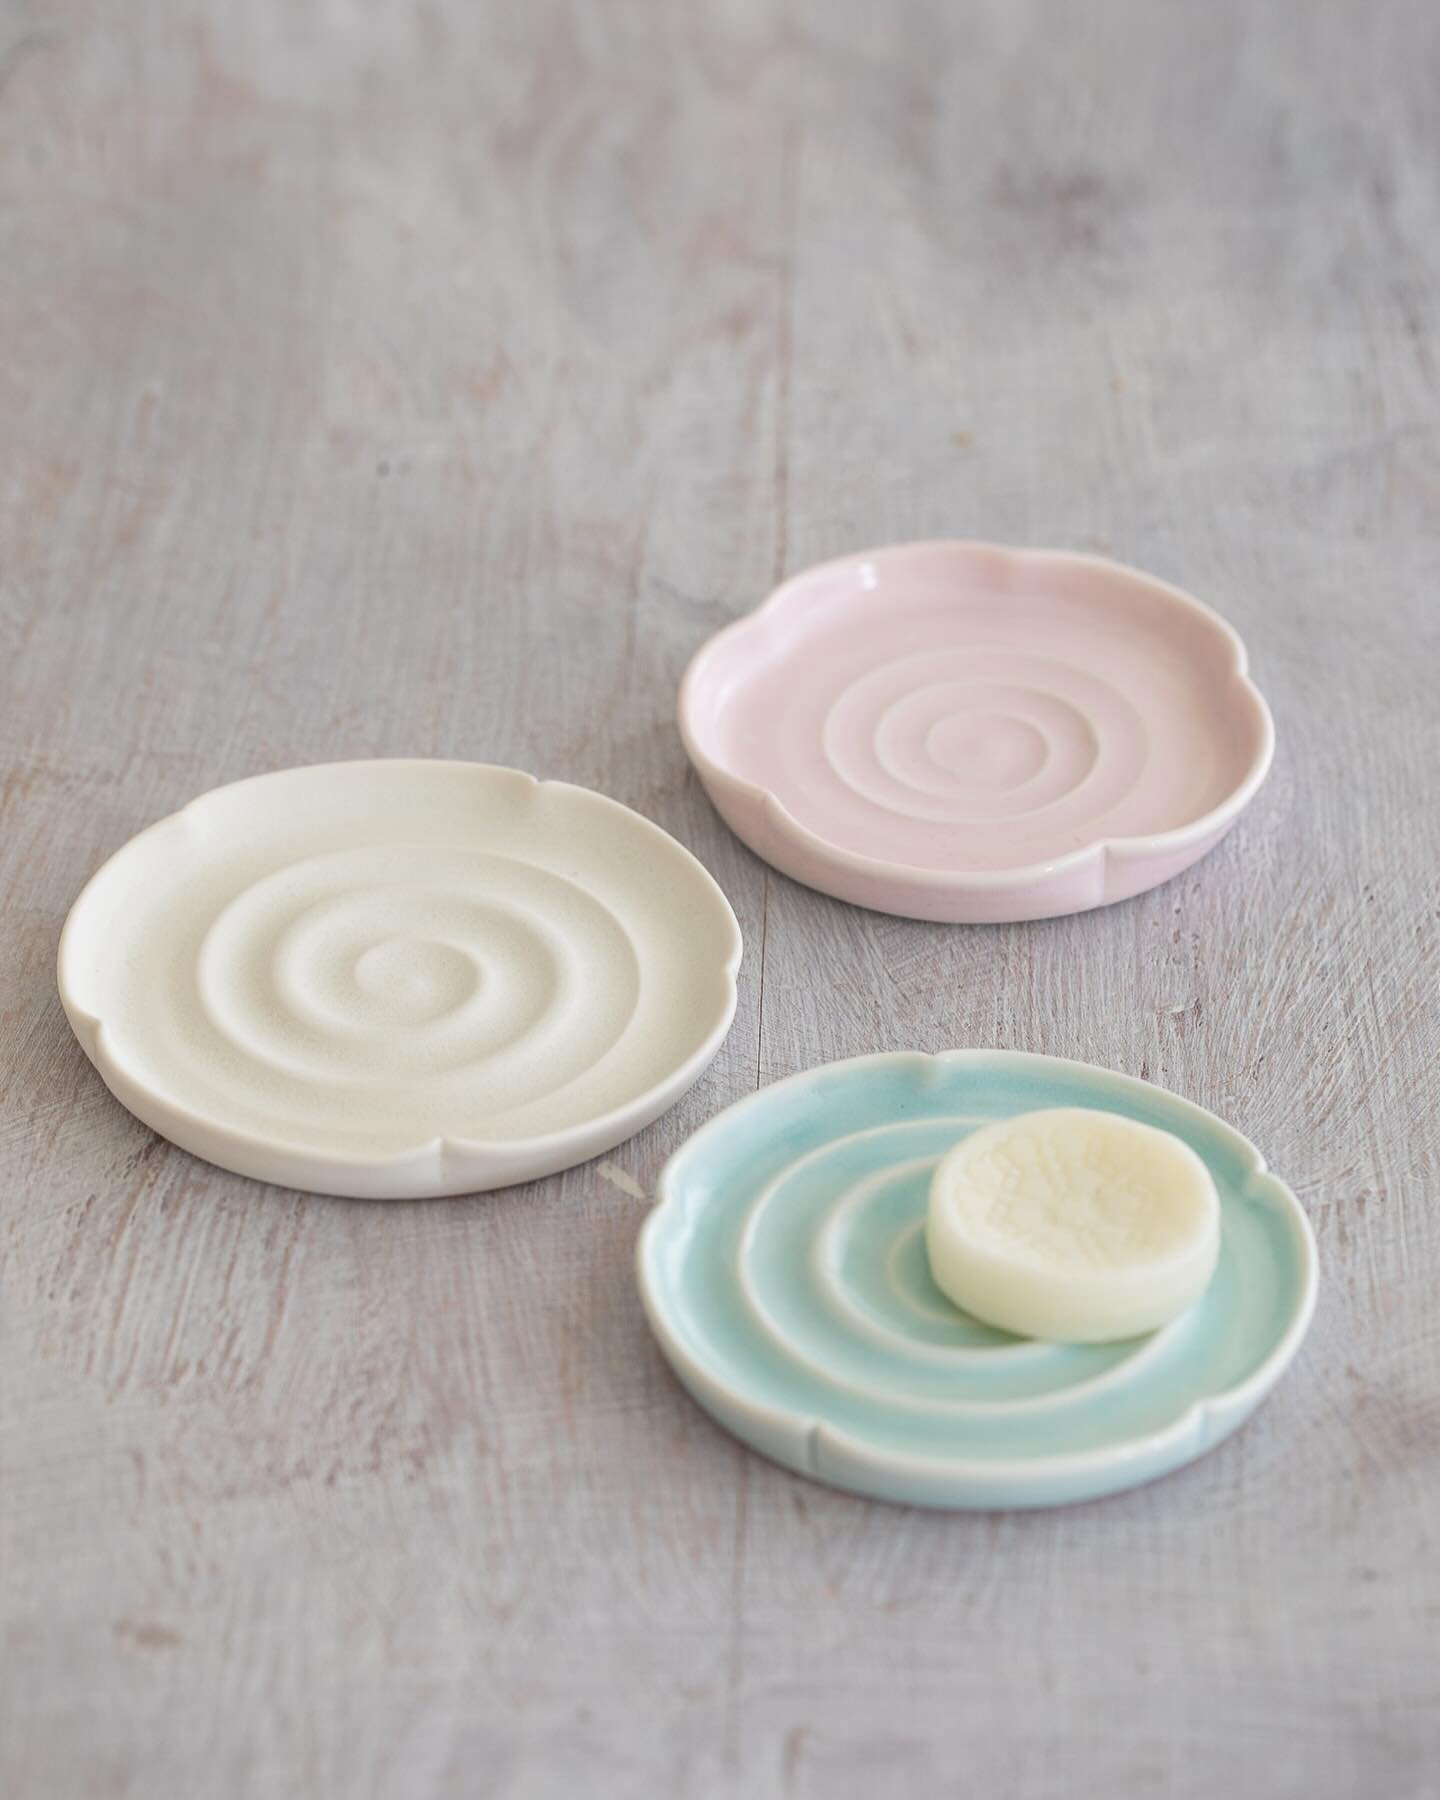 I&rsquo;ve redesigned my soap dishes to give them a floral twist.

Can you let me know whether you prefer the ridges or holes for drainage or the painted version?

These are thrown in porcelain on the wheel and glazed in pretty ice-cream shades for t